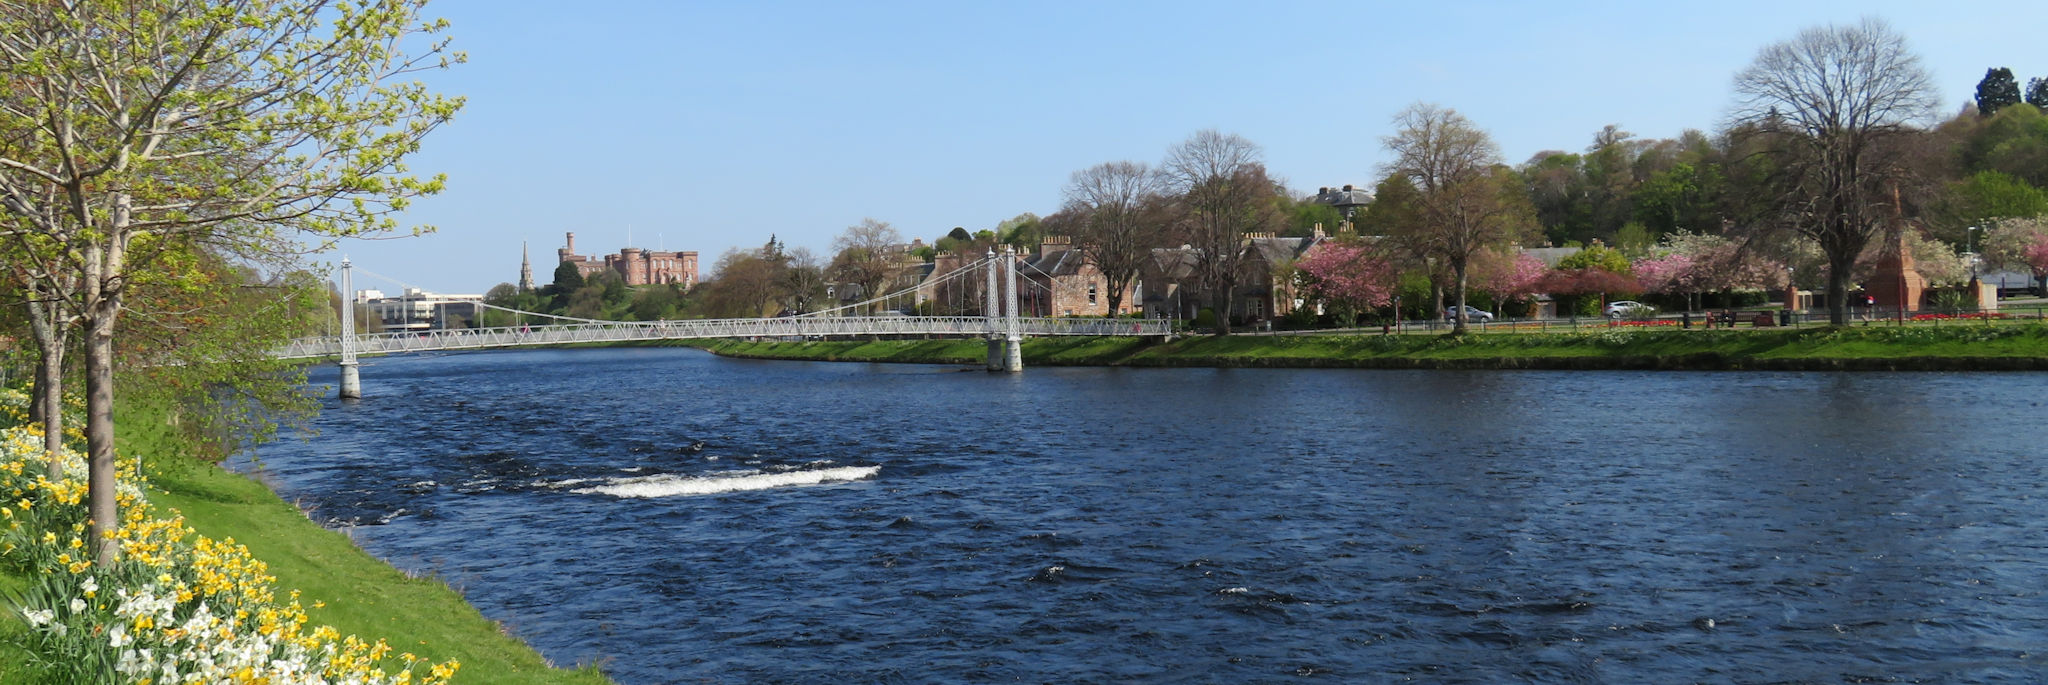 Inverness Castle & River Ness in spring